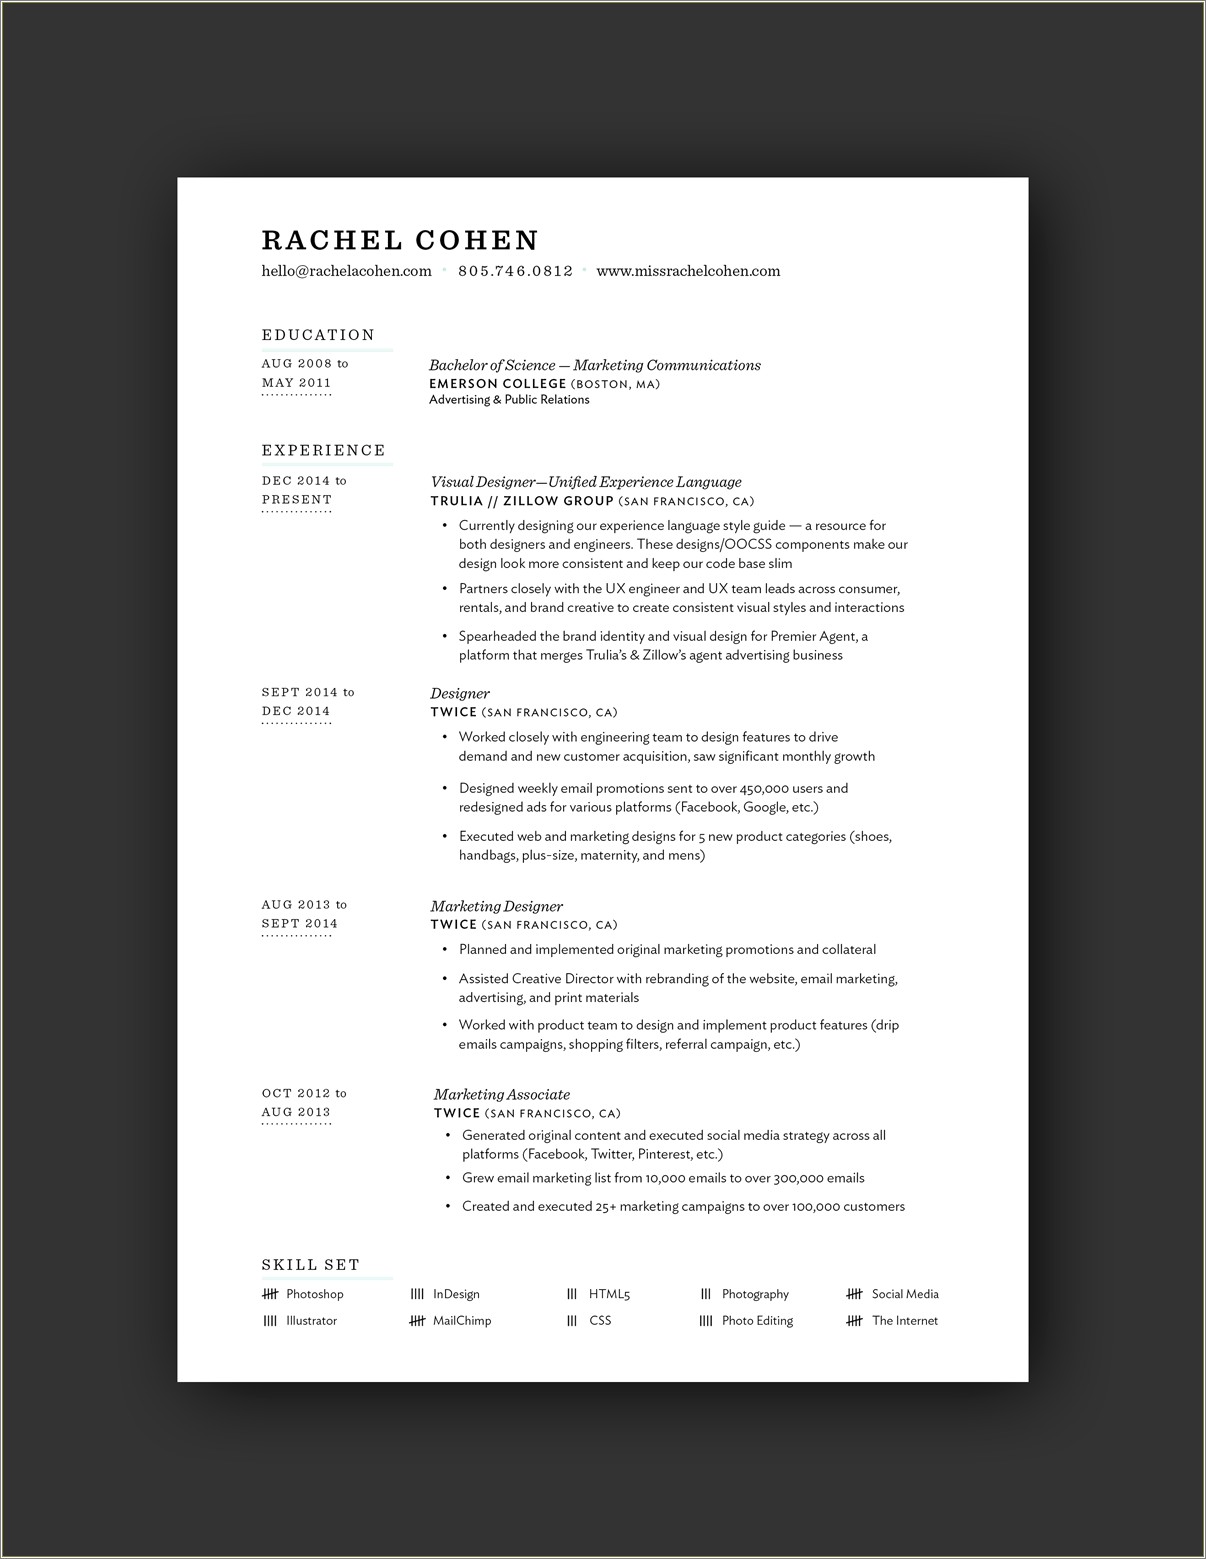 Resume Worked For Same Company Twice